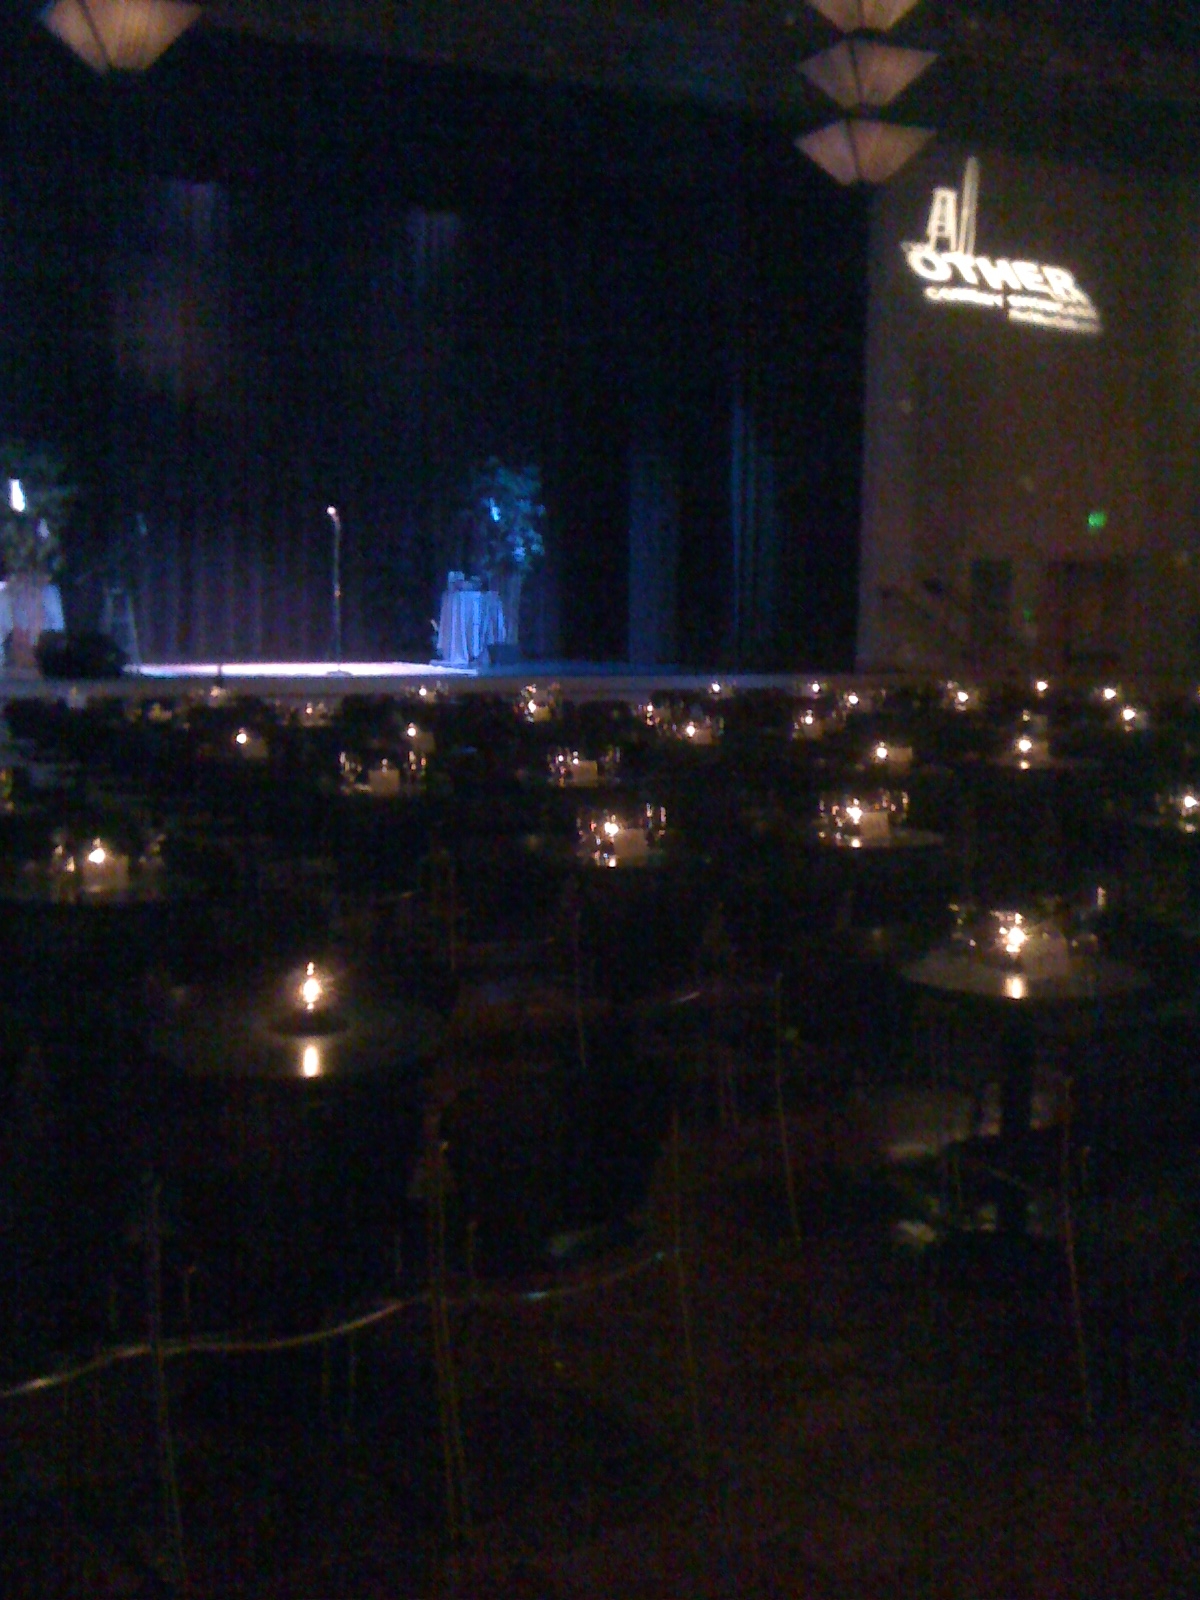 The Osher Marin JCC’s Hoytt Theater offers reserved candle-lit table seating